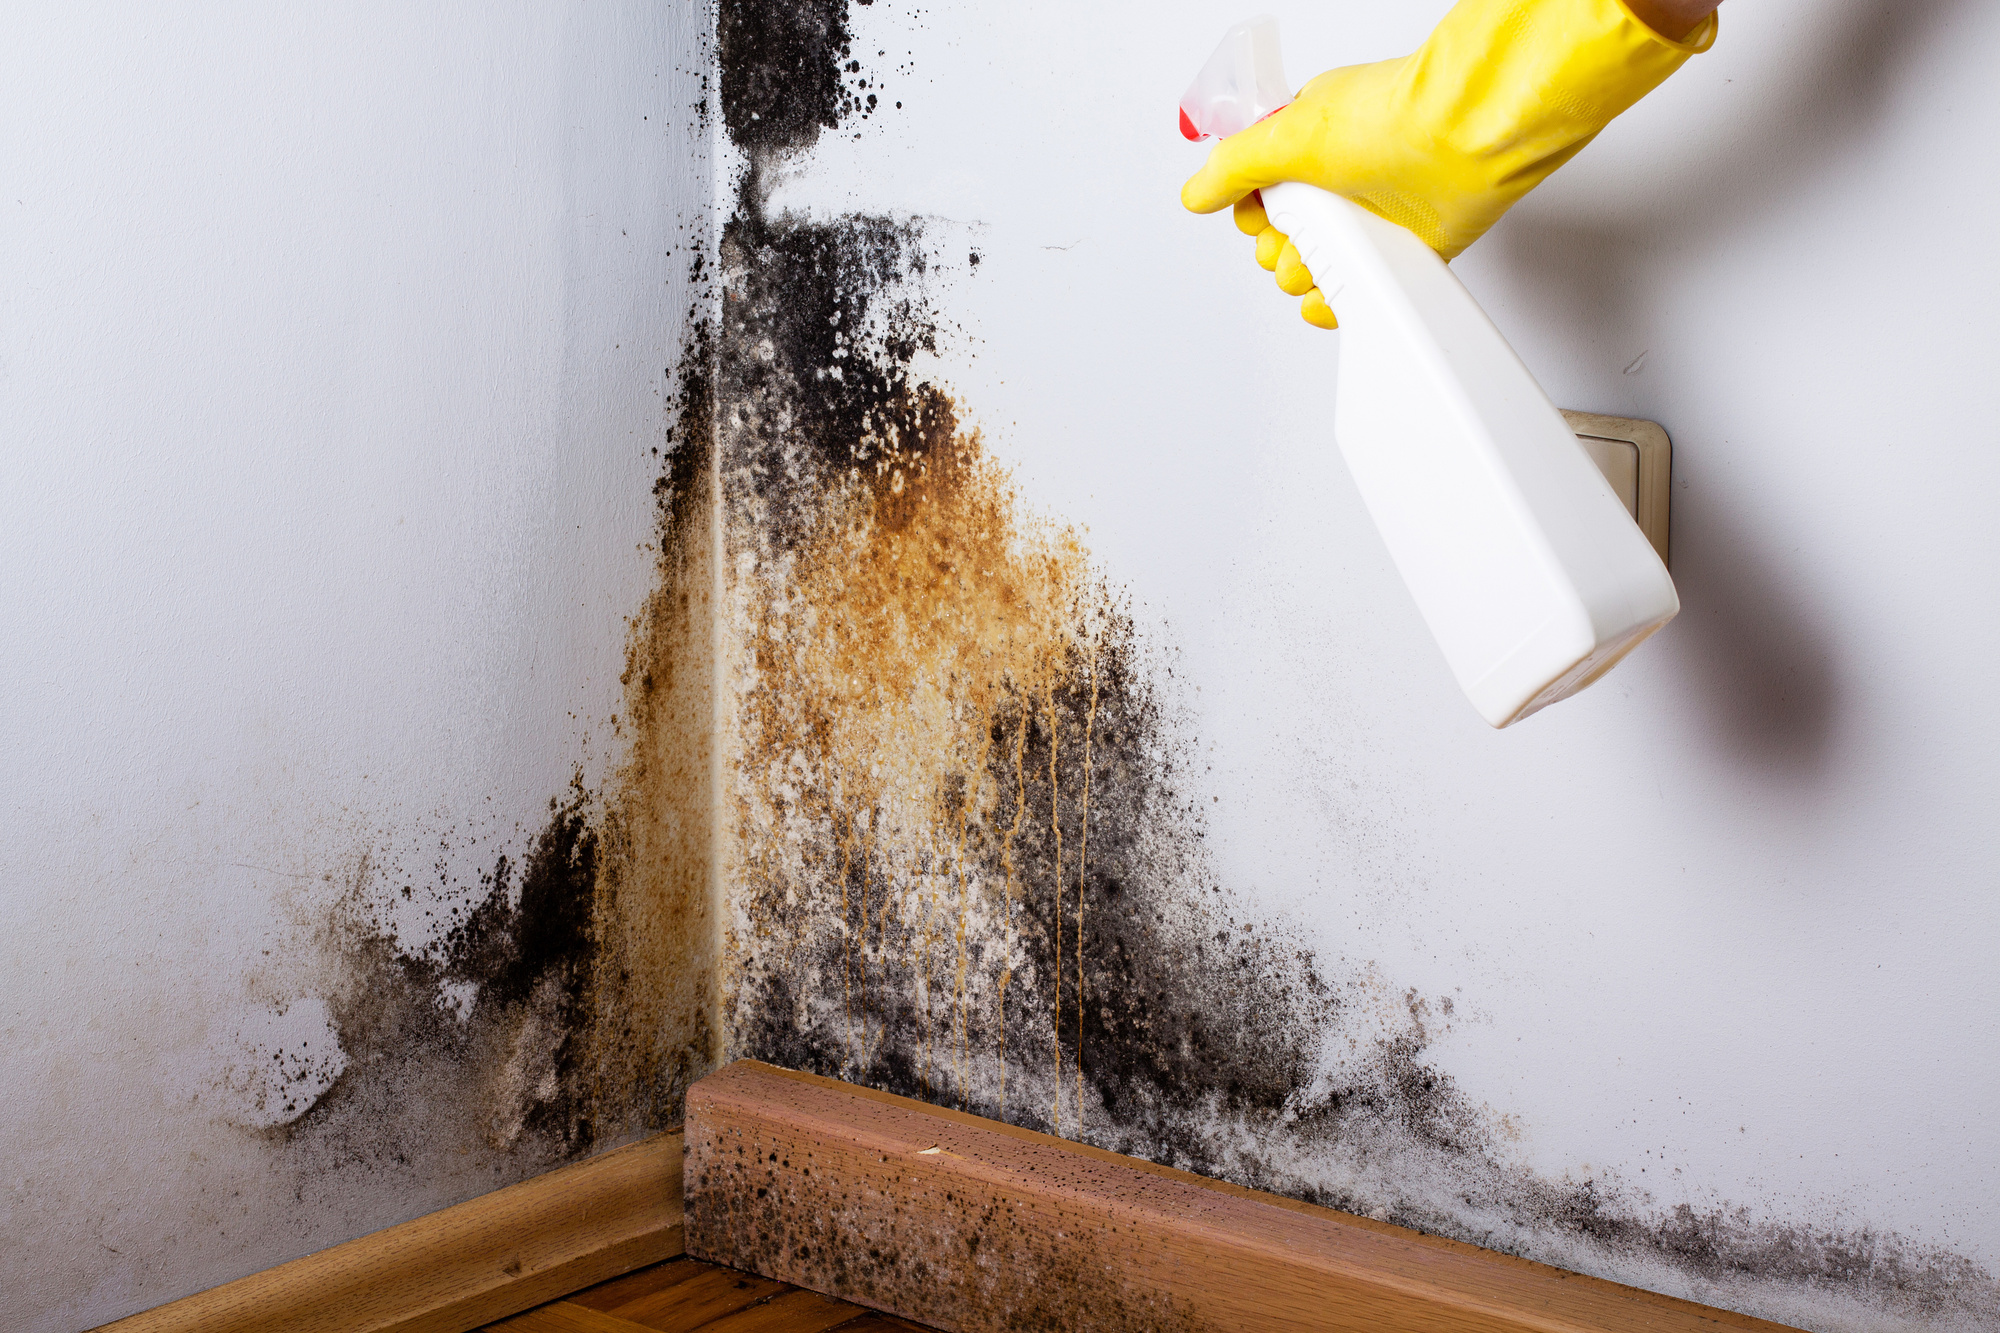 Mold Remediation: How to Get Rid of Mold